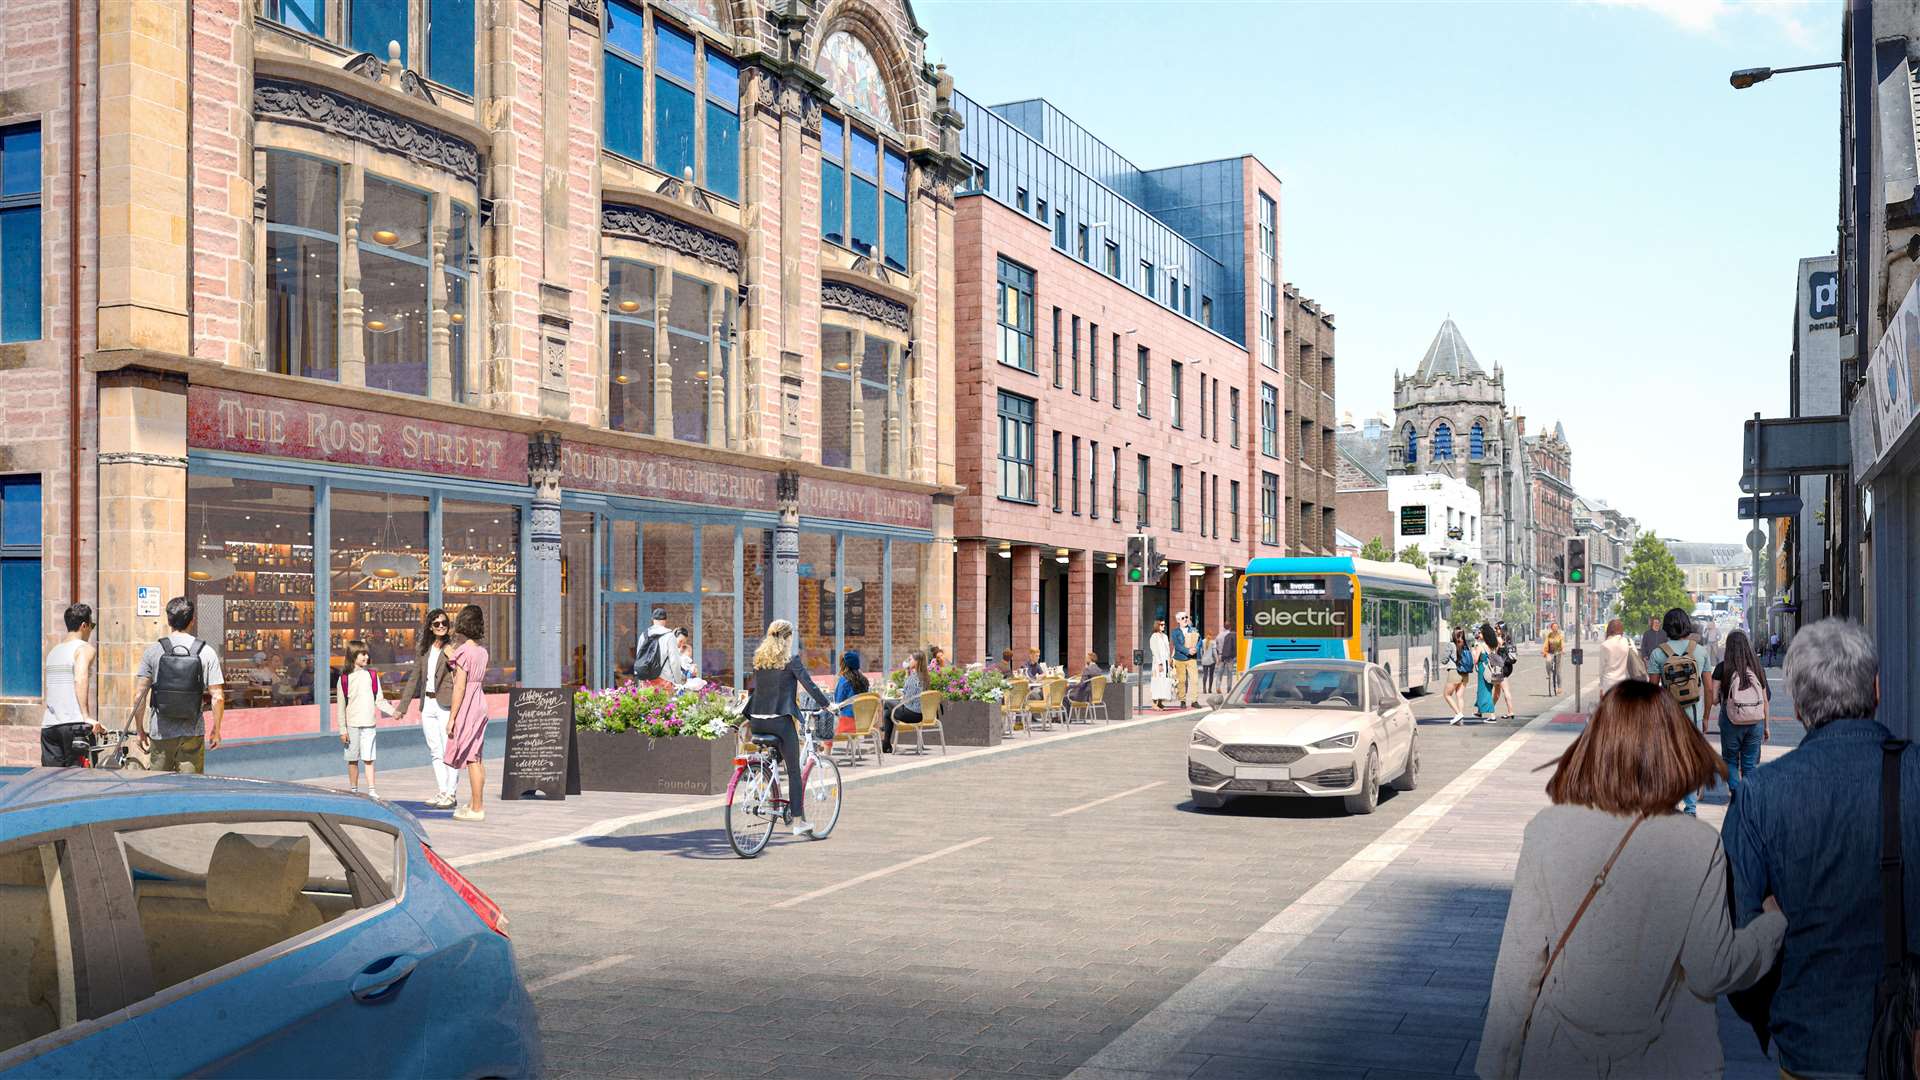 Plans to transform Academy Street can now be progressed despite opposition.